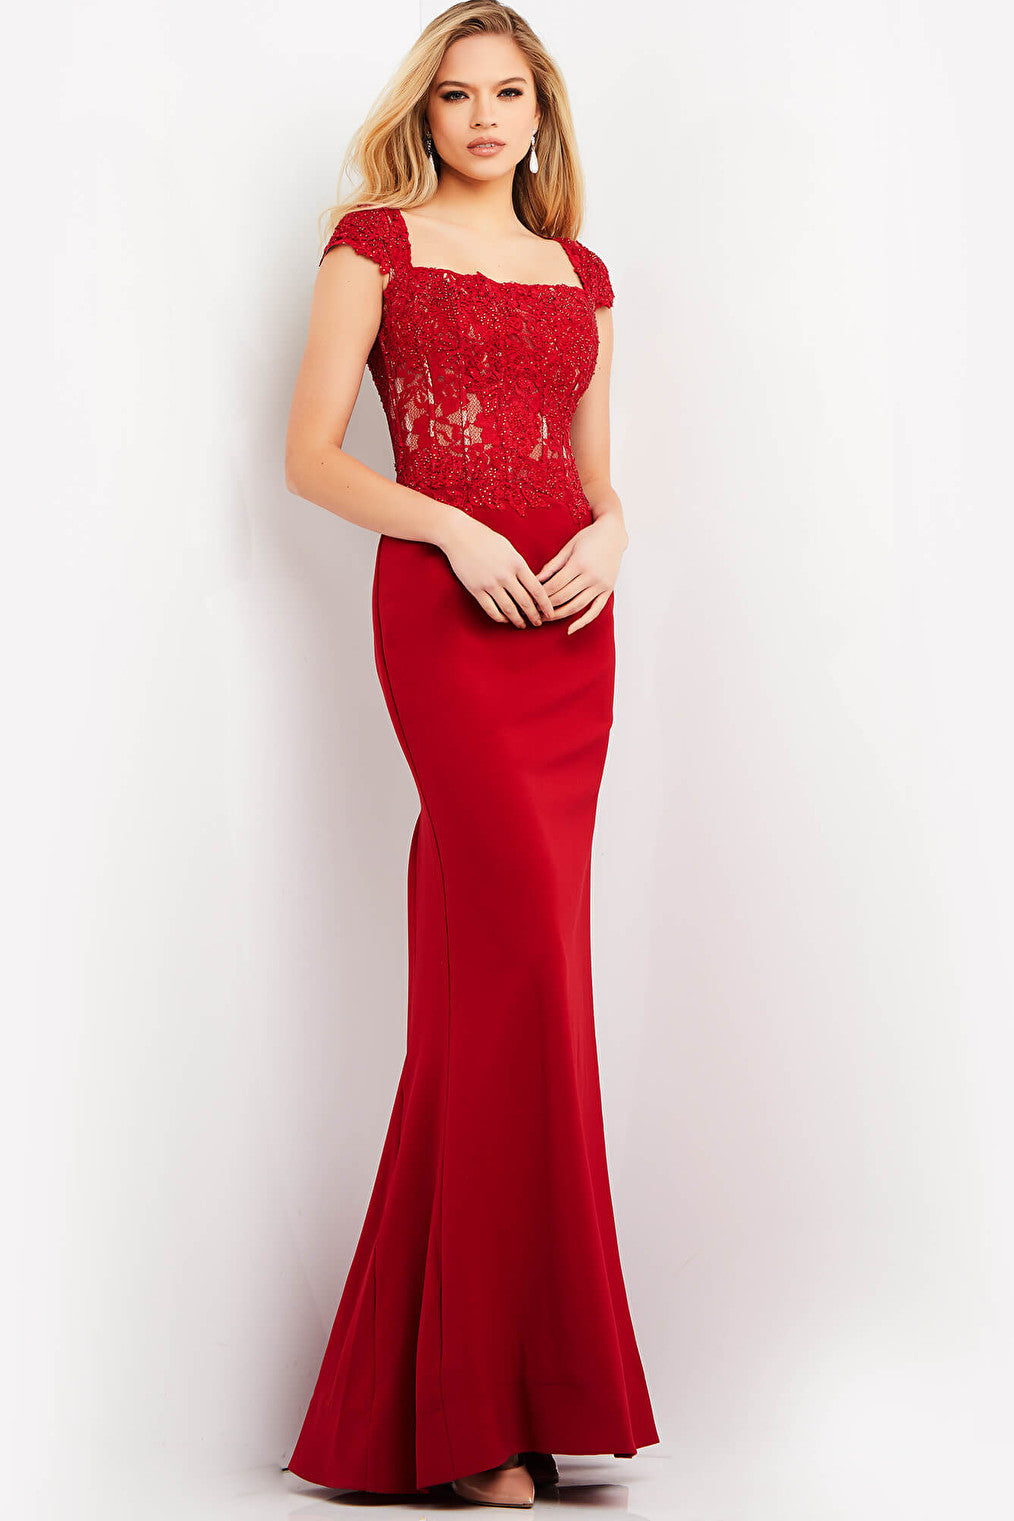 red fitted dress 06825